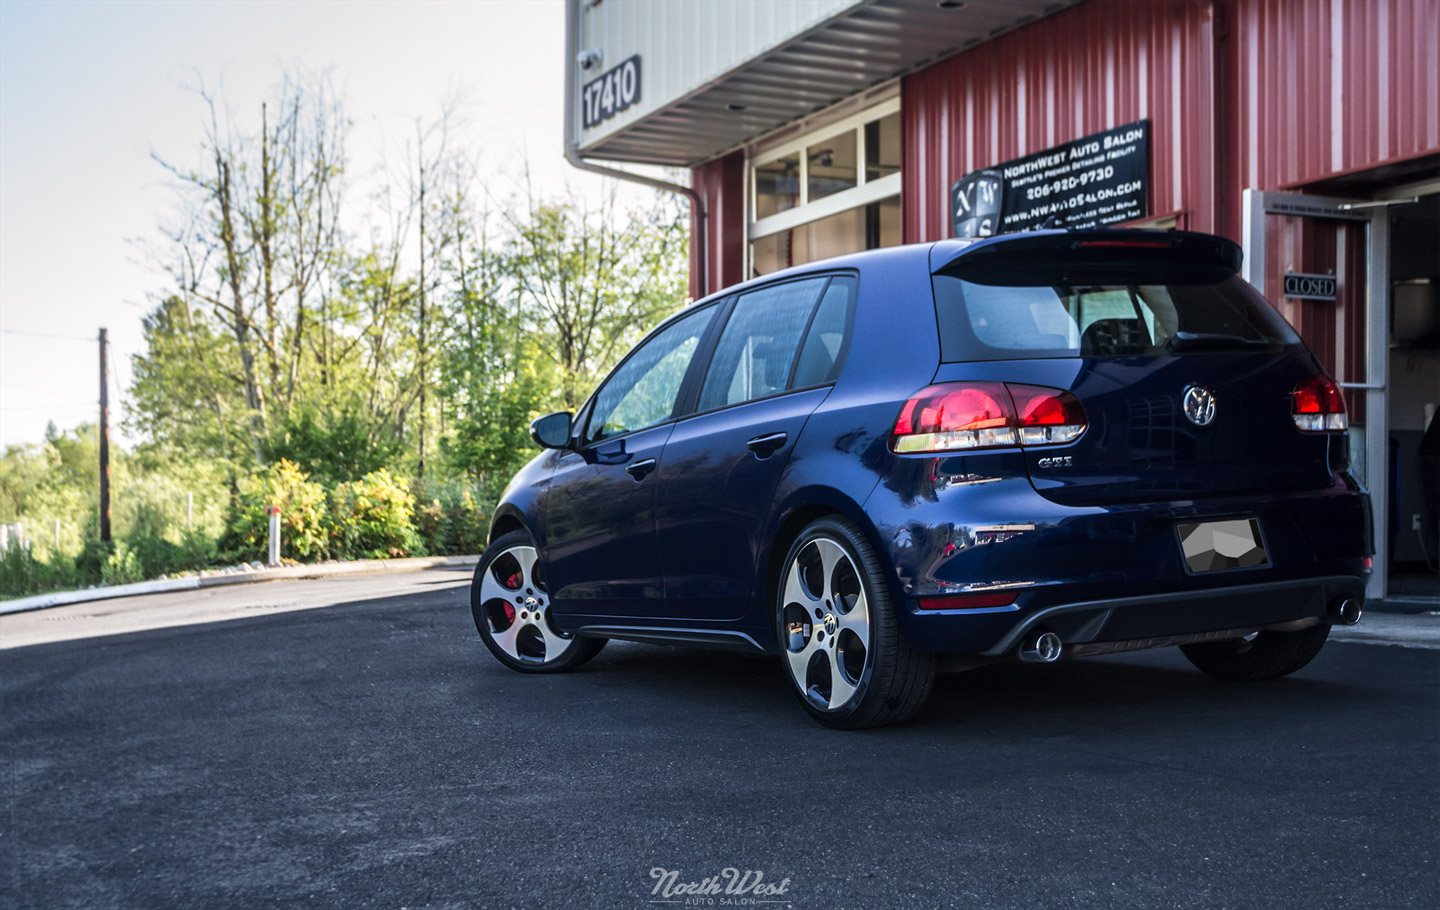 VW-GTI-key-scratch-removal-paint-touch-up-protect-detail-package-5